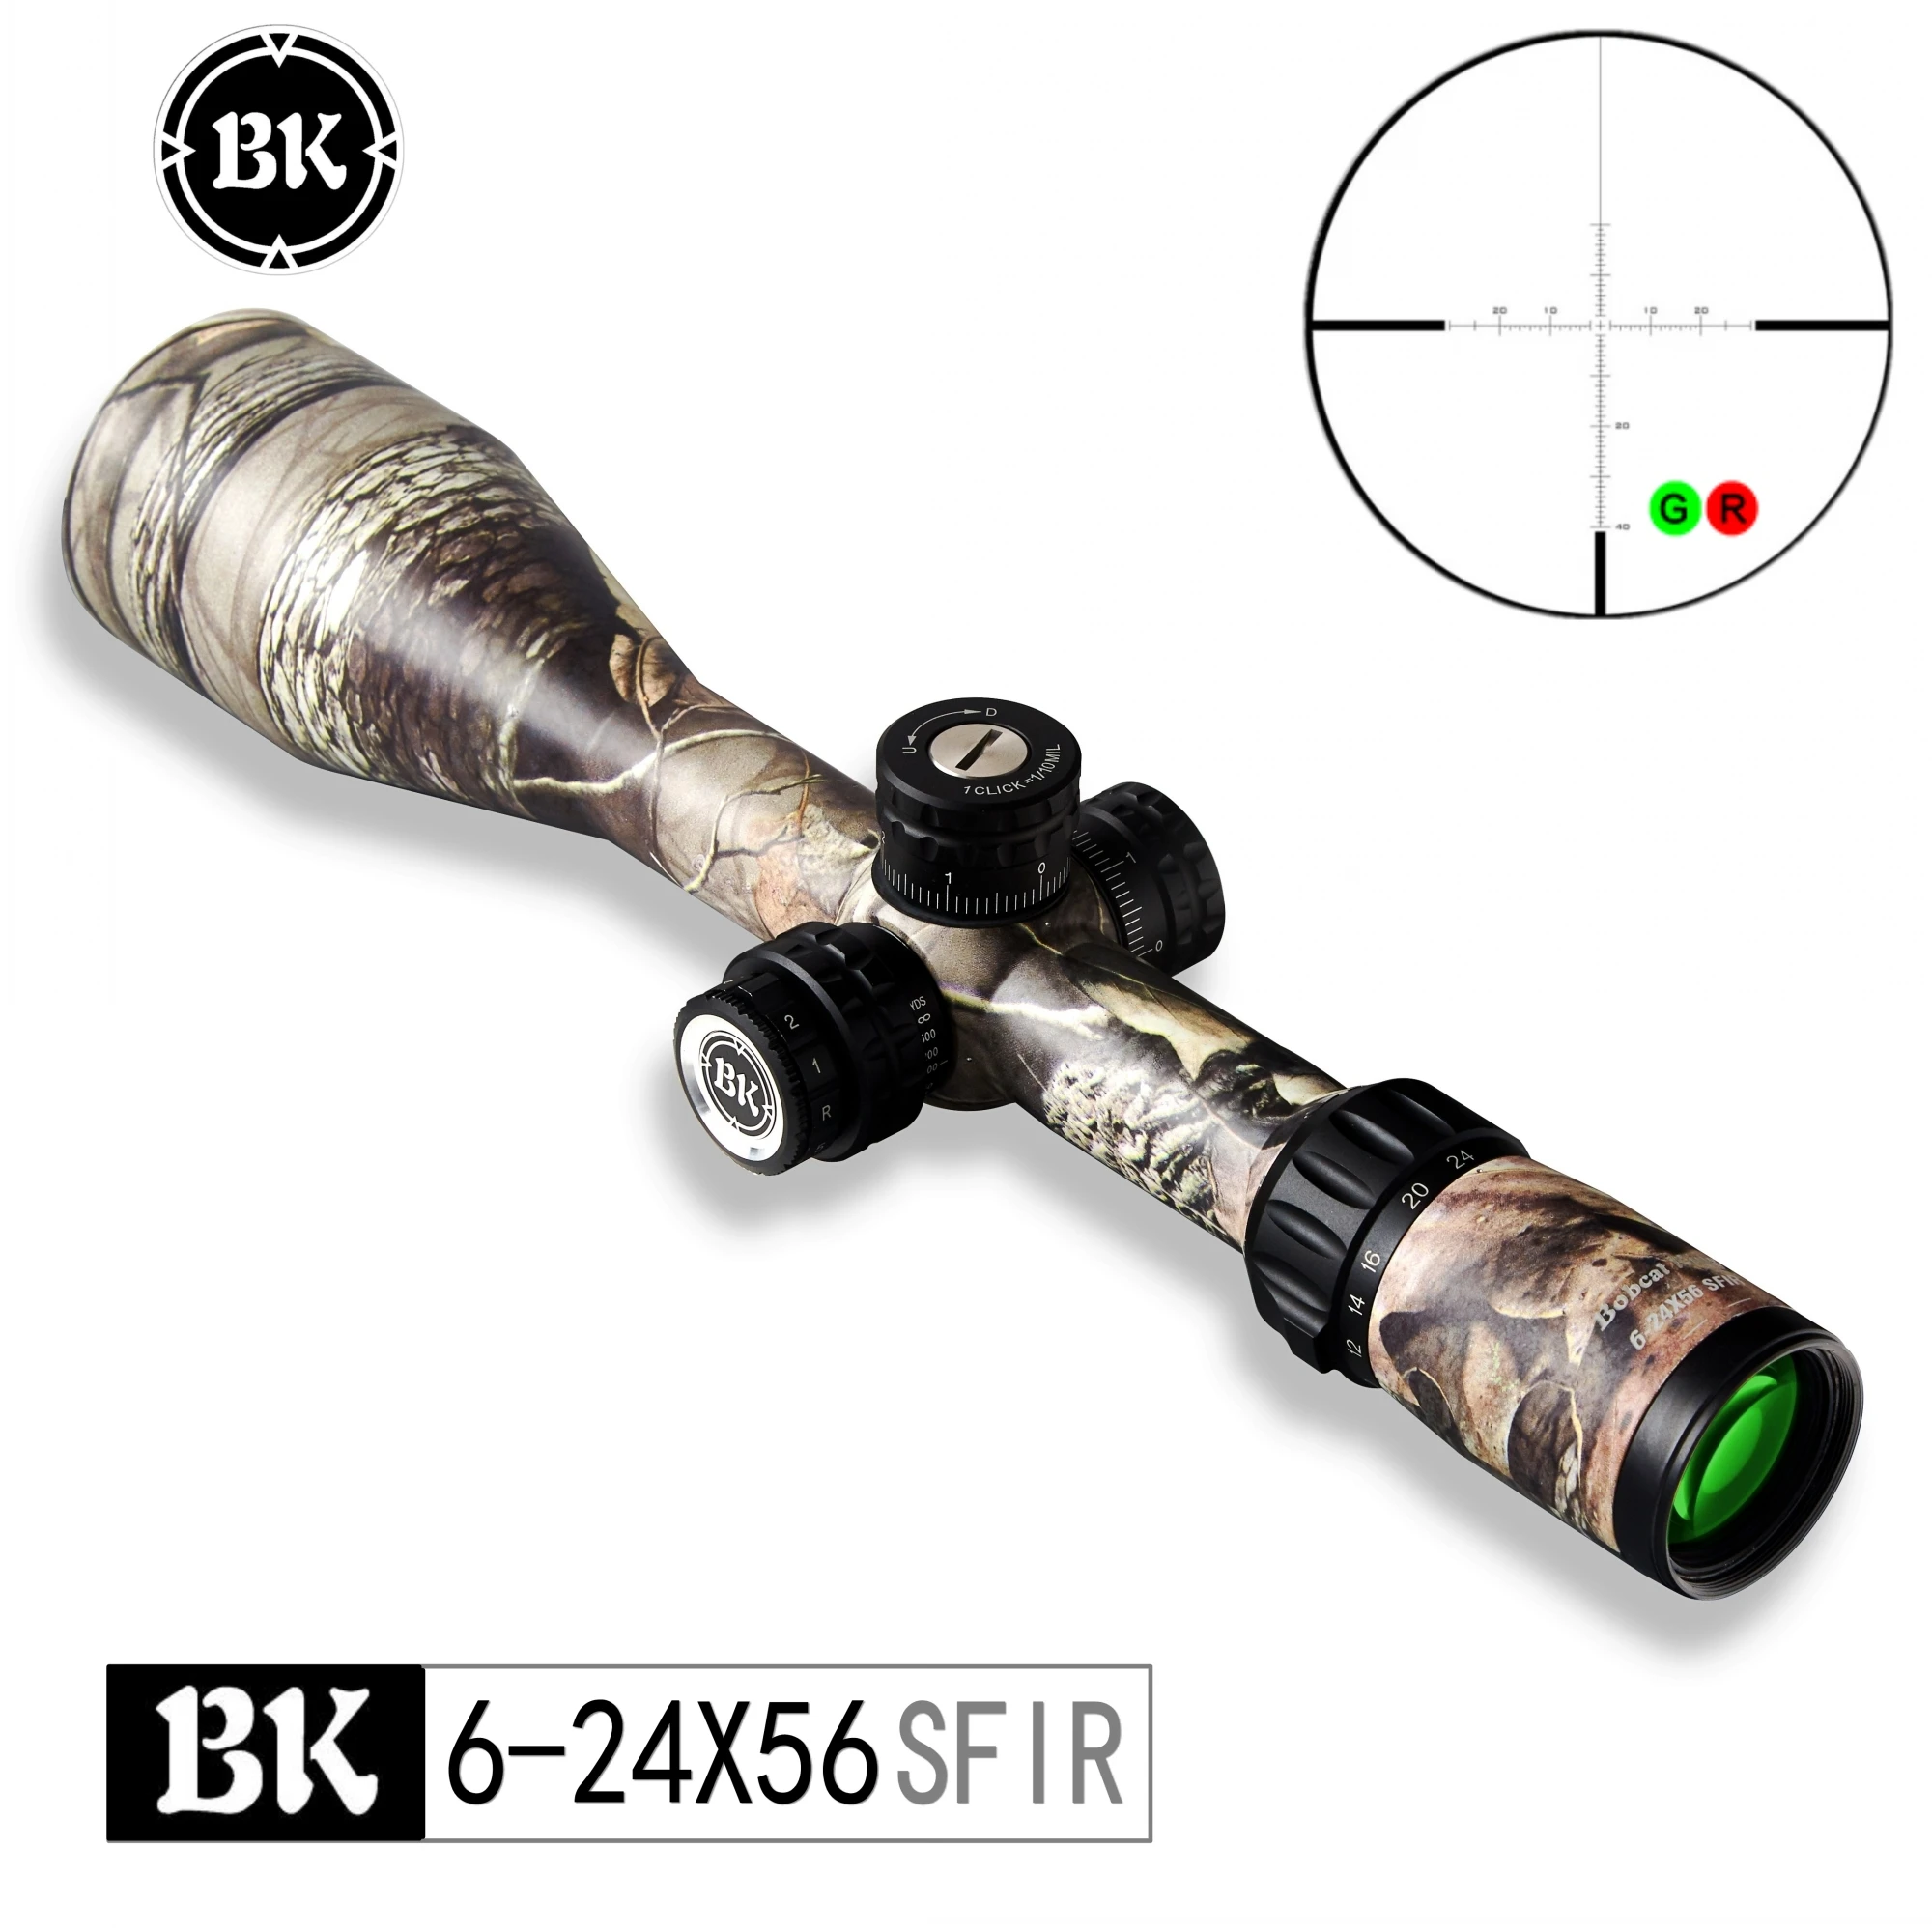 

Bobcat King 6-24X56 SFIR Riflescopes Airsoft Hunting Rifle Scope Traffic Light Illumination Sniper Tactical Optical Sight, Camouflage color